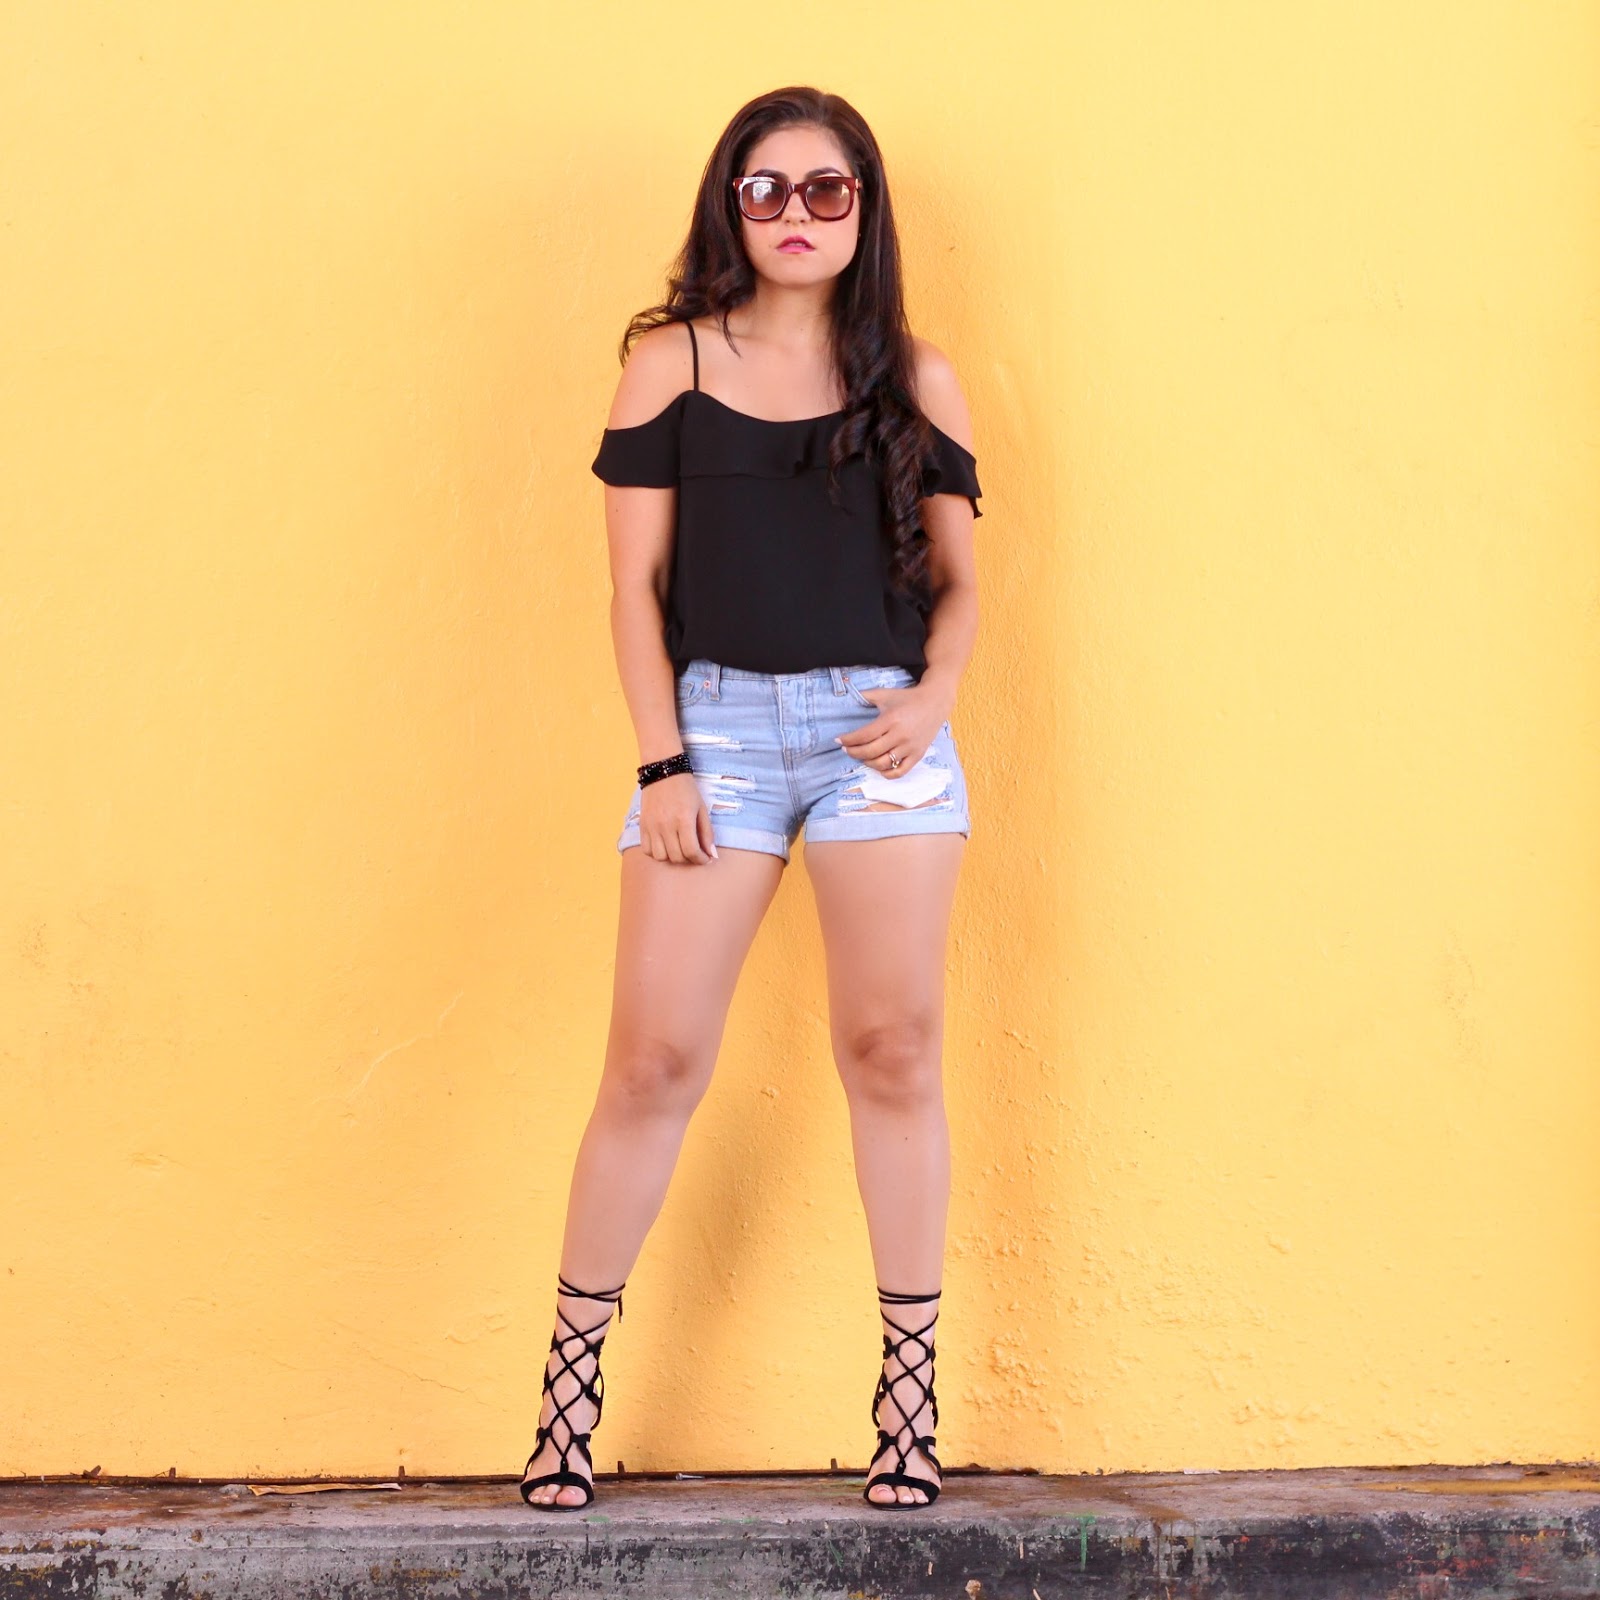 Chic by V: High Waisted Denim Shorts and Lace Up Heels